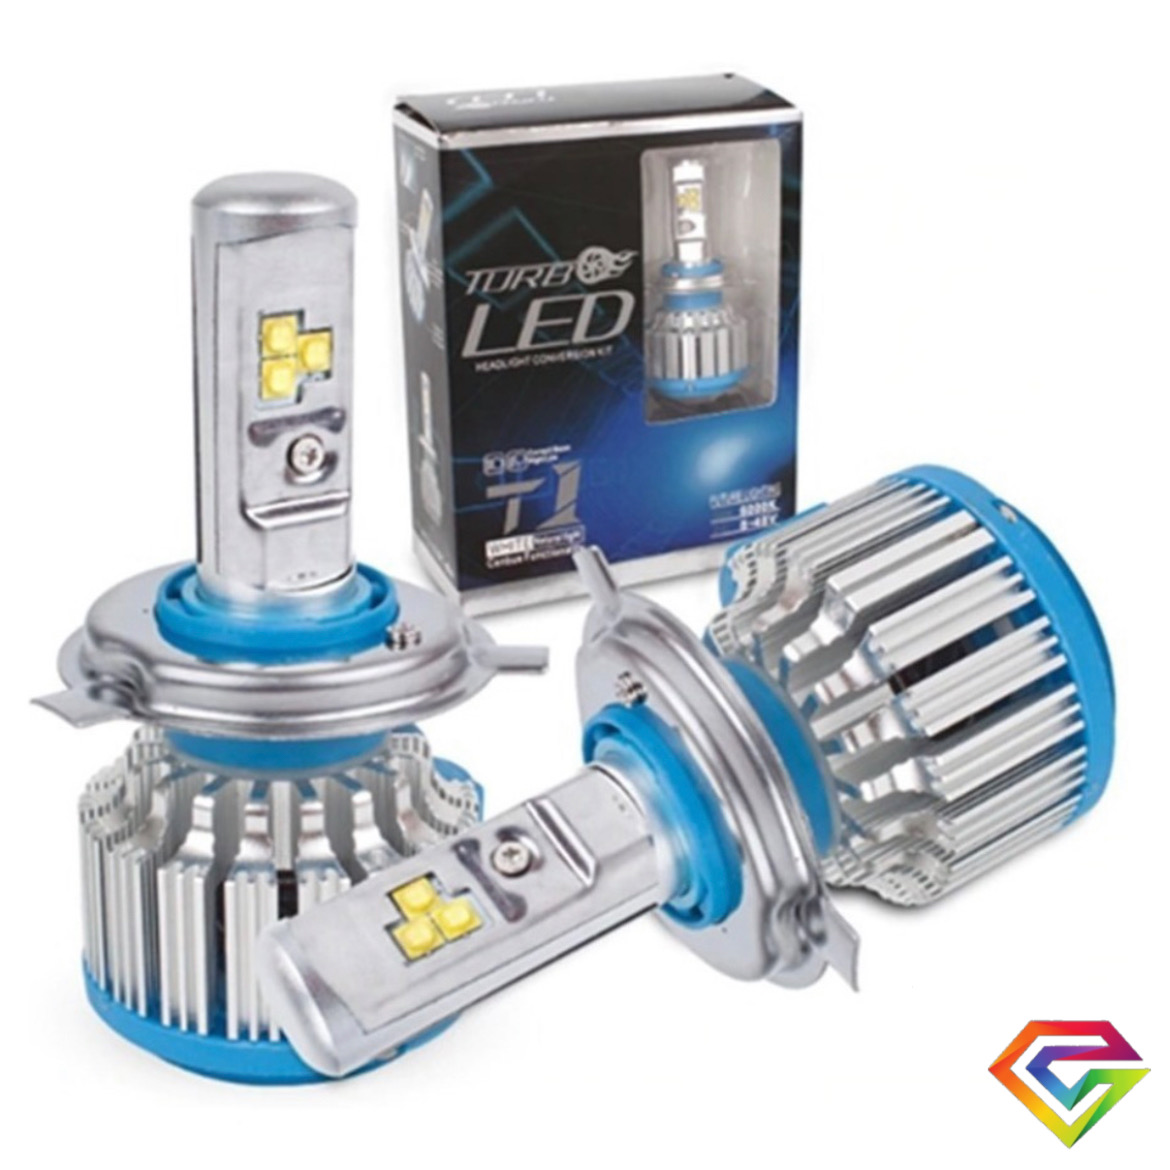 Turbo Led T1 H4 8000lm Canbus